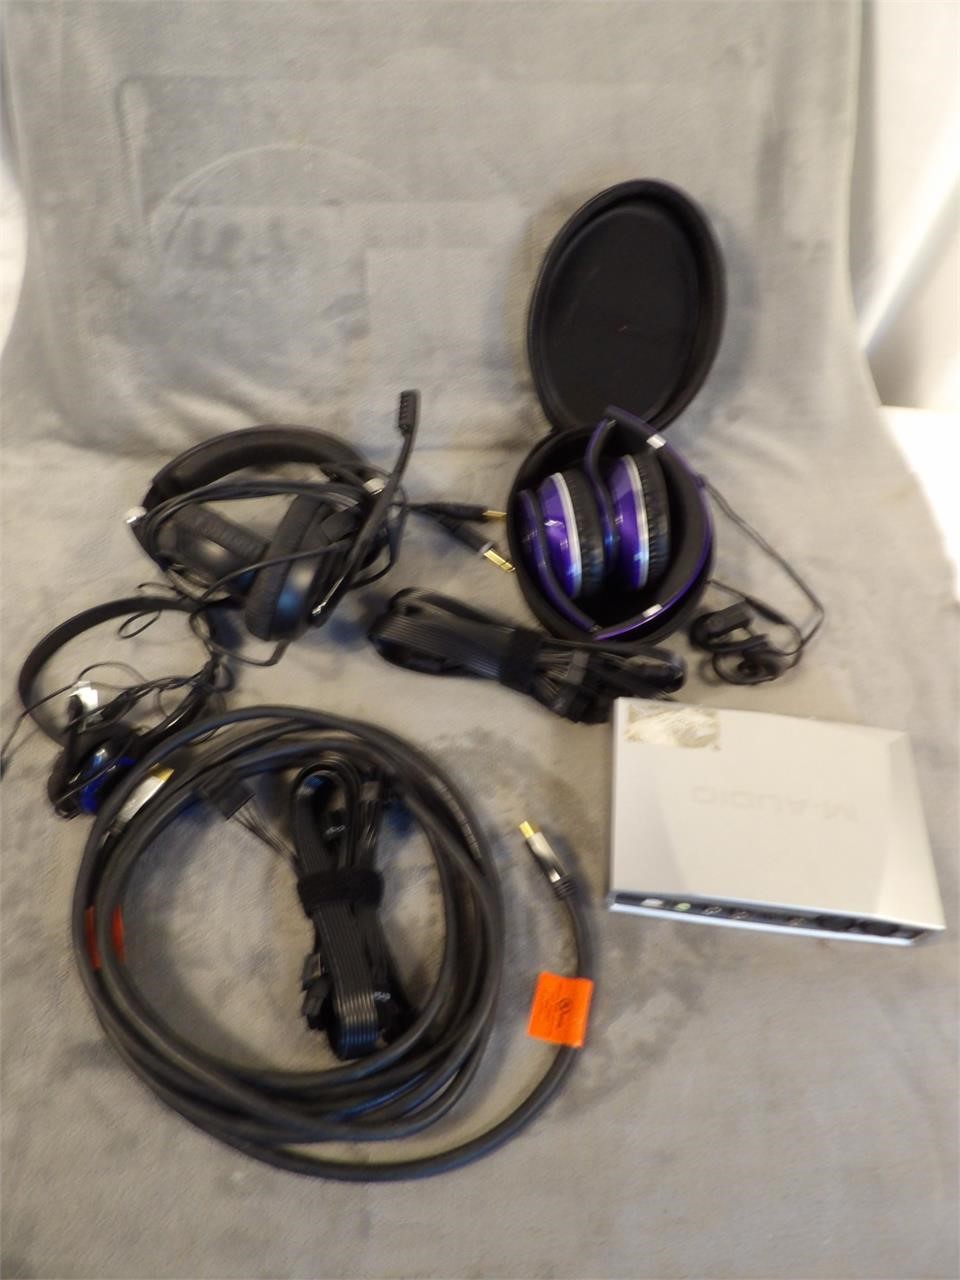 Lot of headphones and Media Accessories